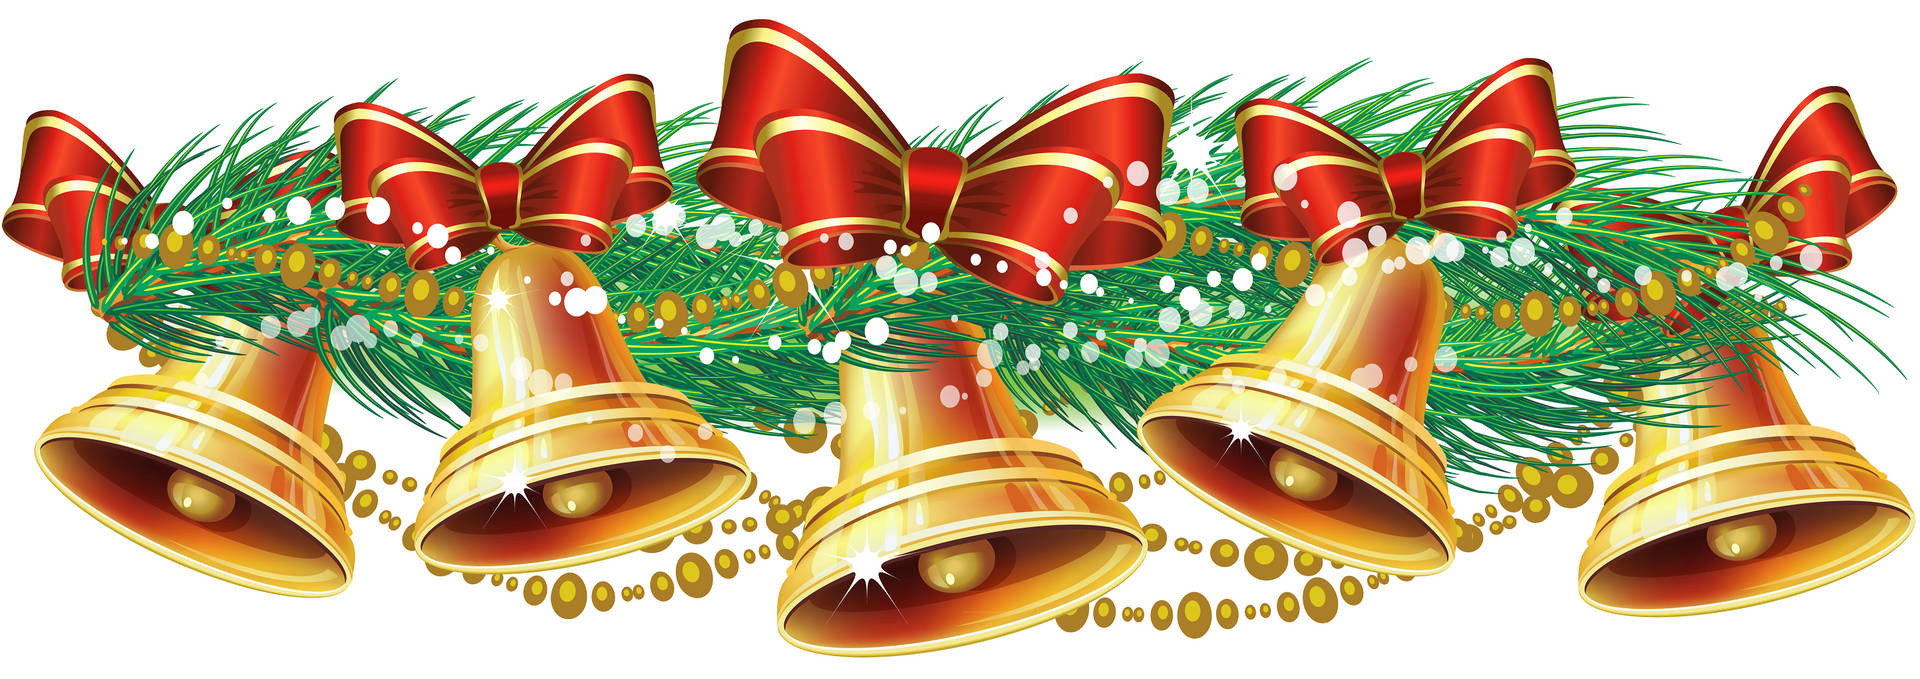 Christmas Bells Rows Background